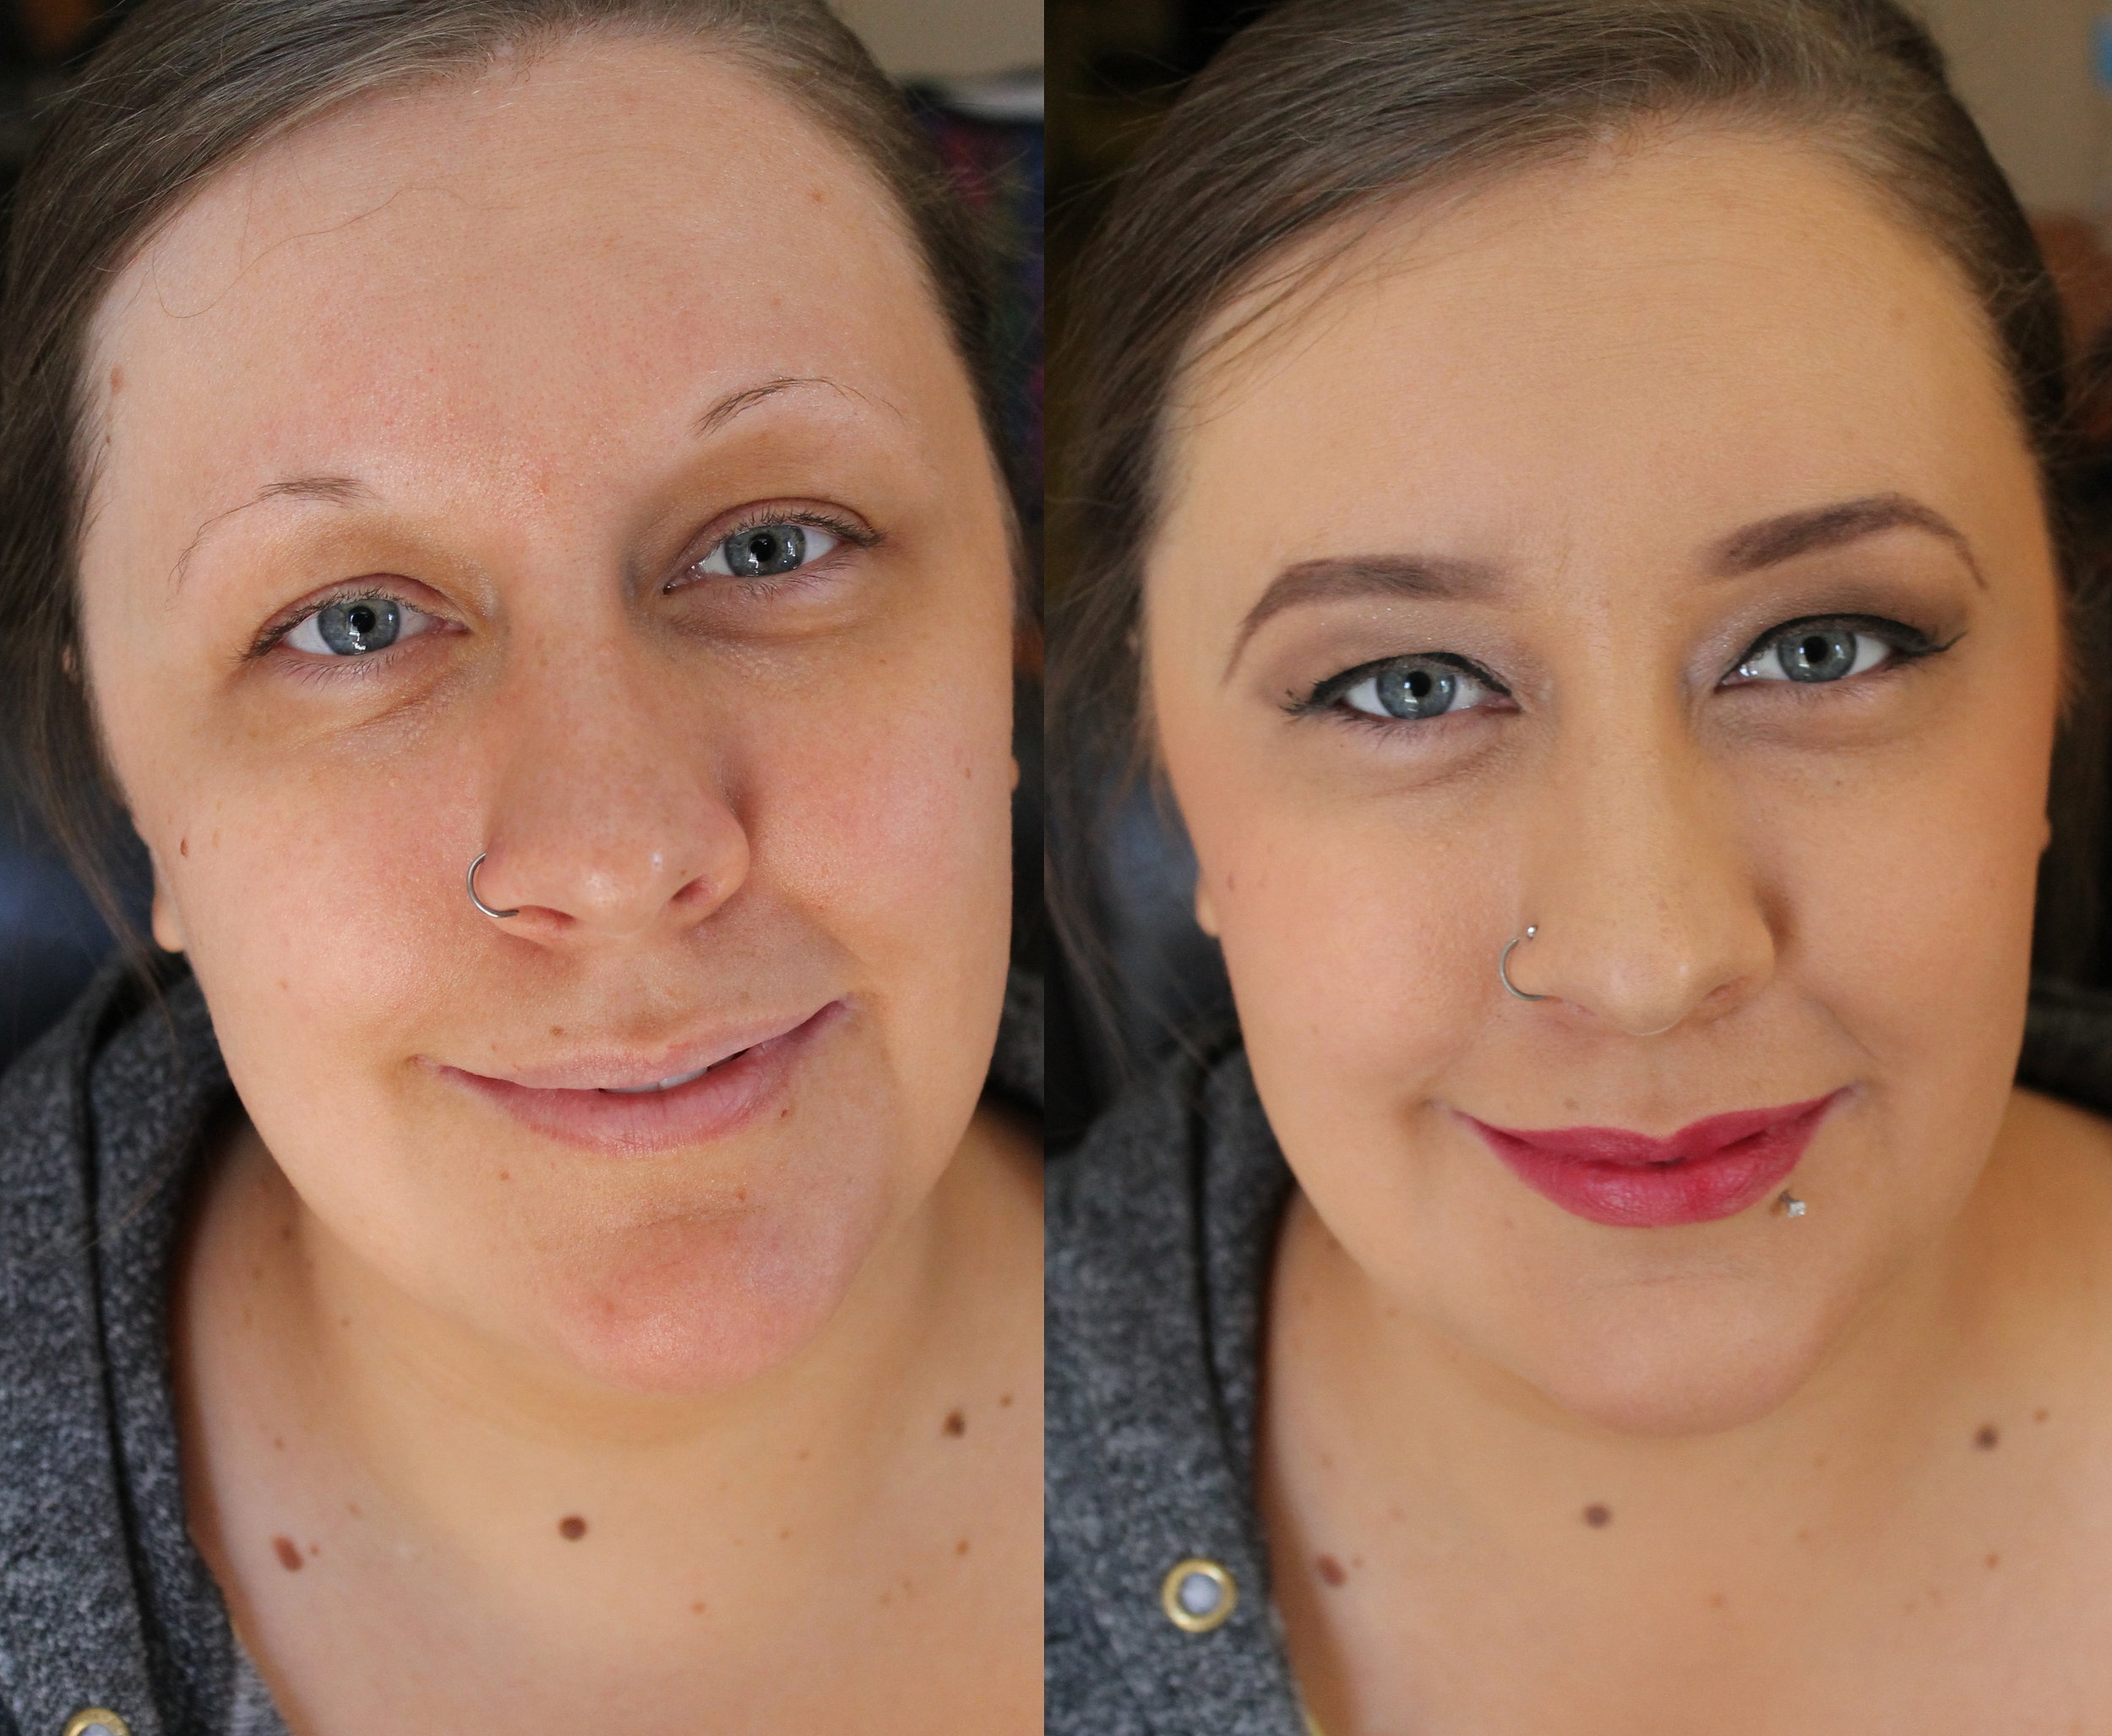 before and after transformation makeup by Ashlie Lauren glamour studio 24.jpg